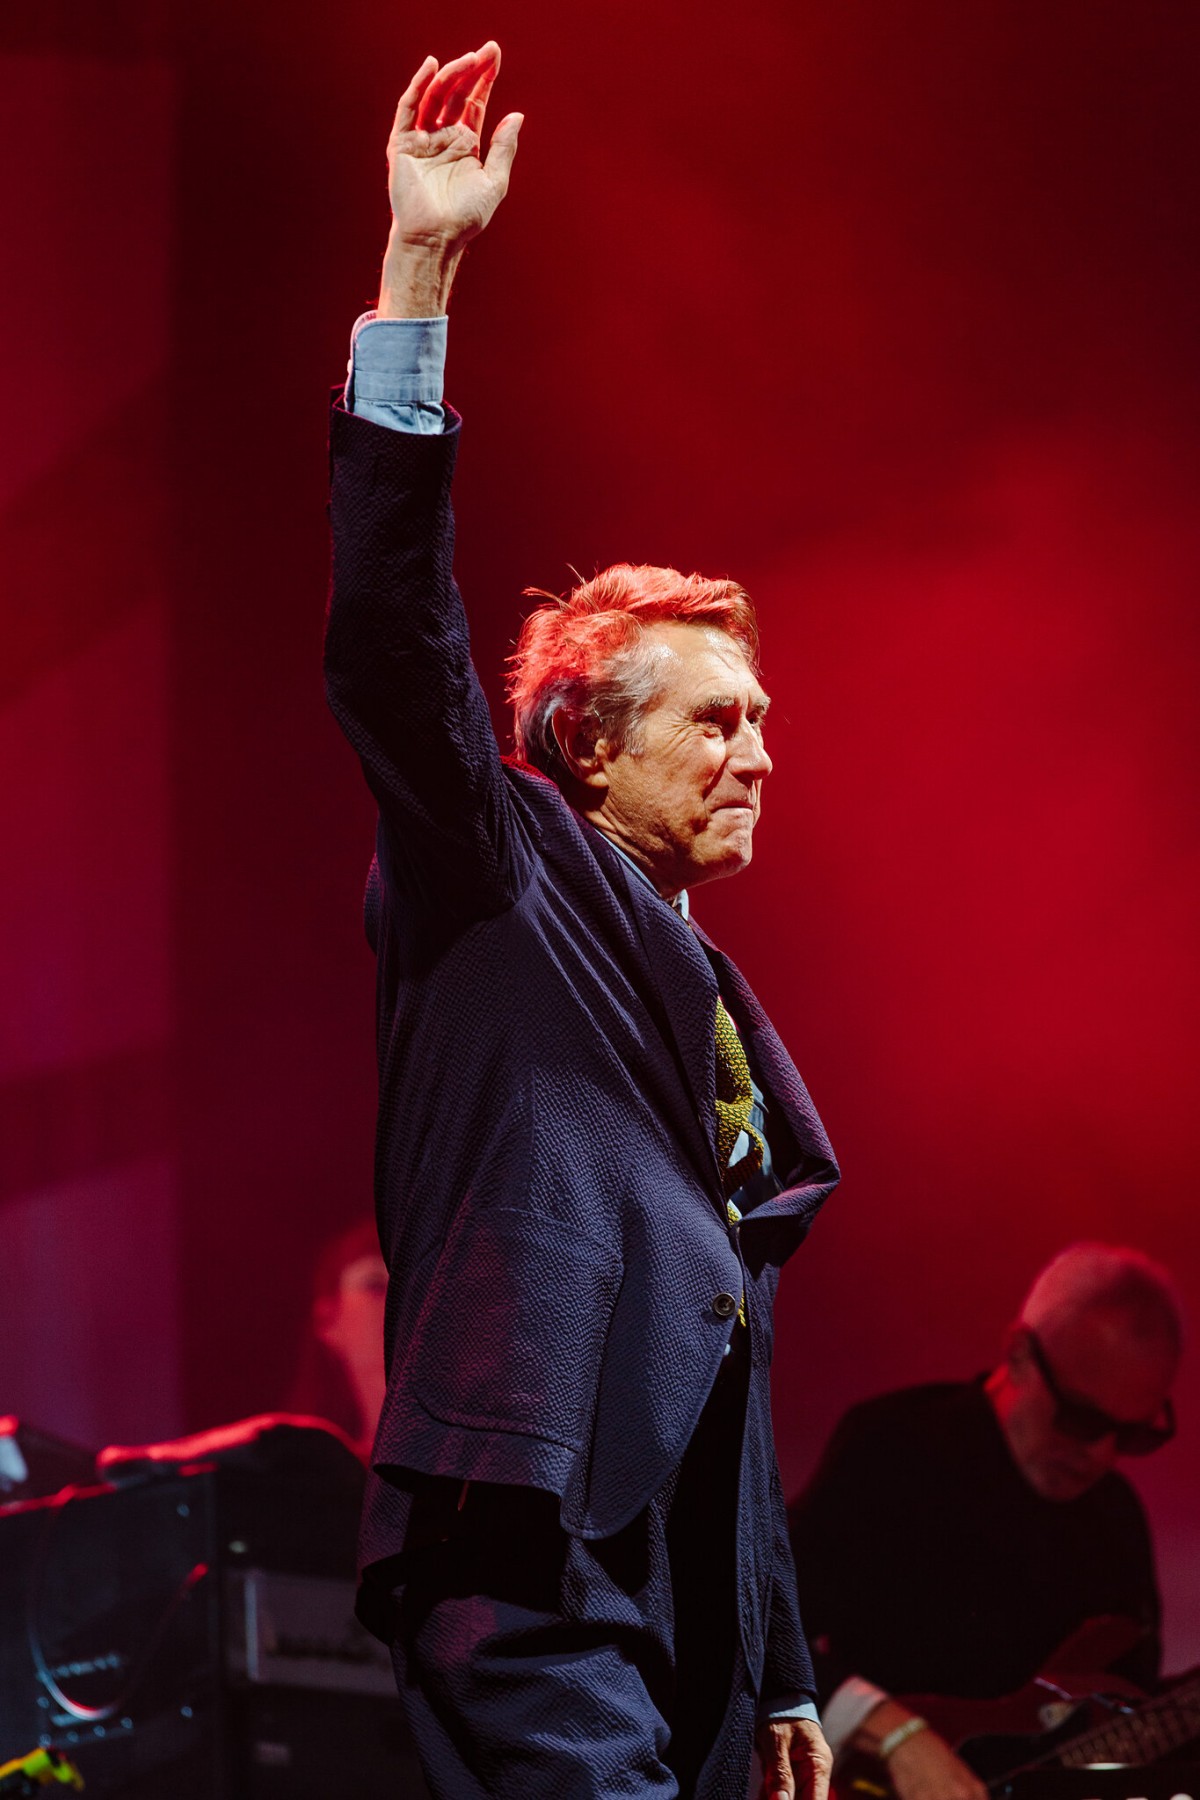 Bryan Ferry saluting the crowd at Rewind 2019.